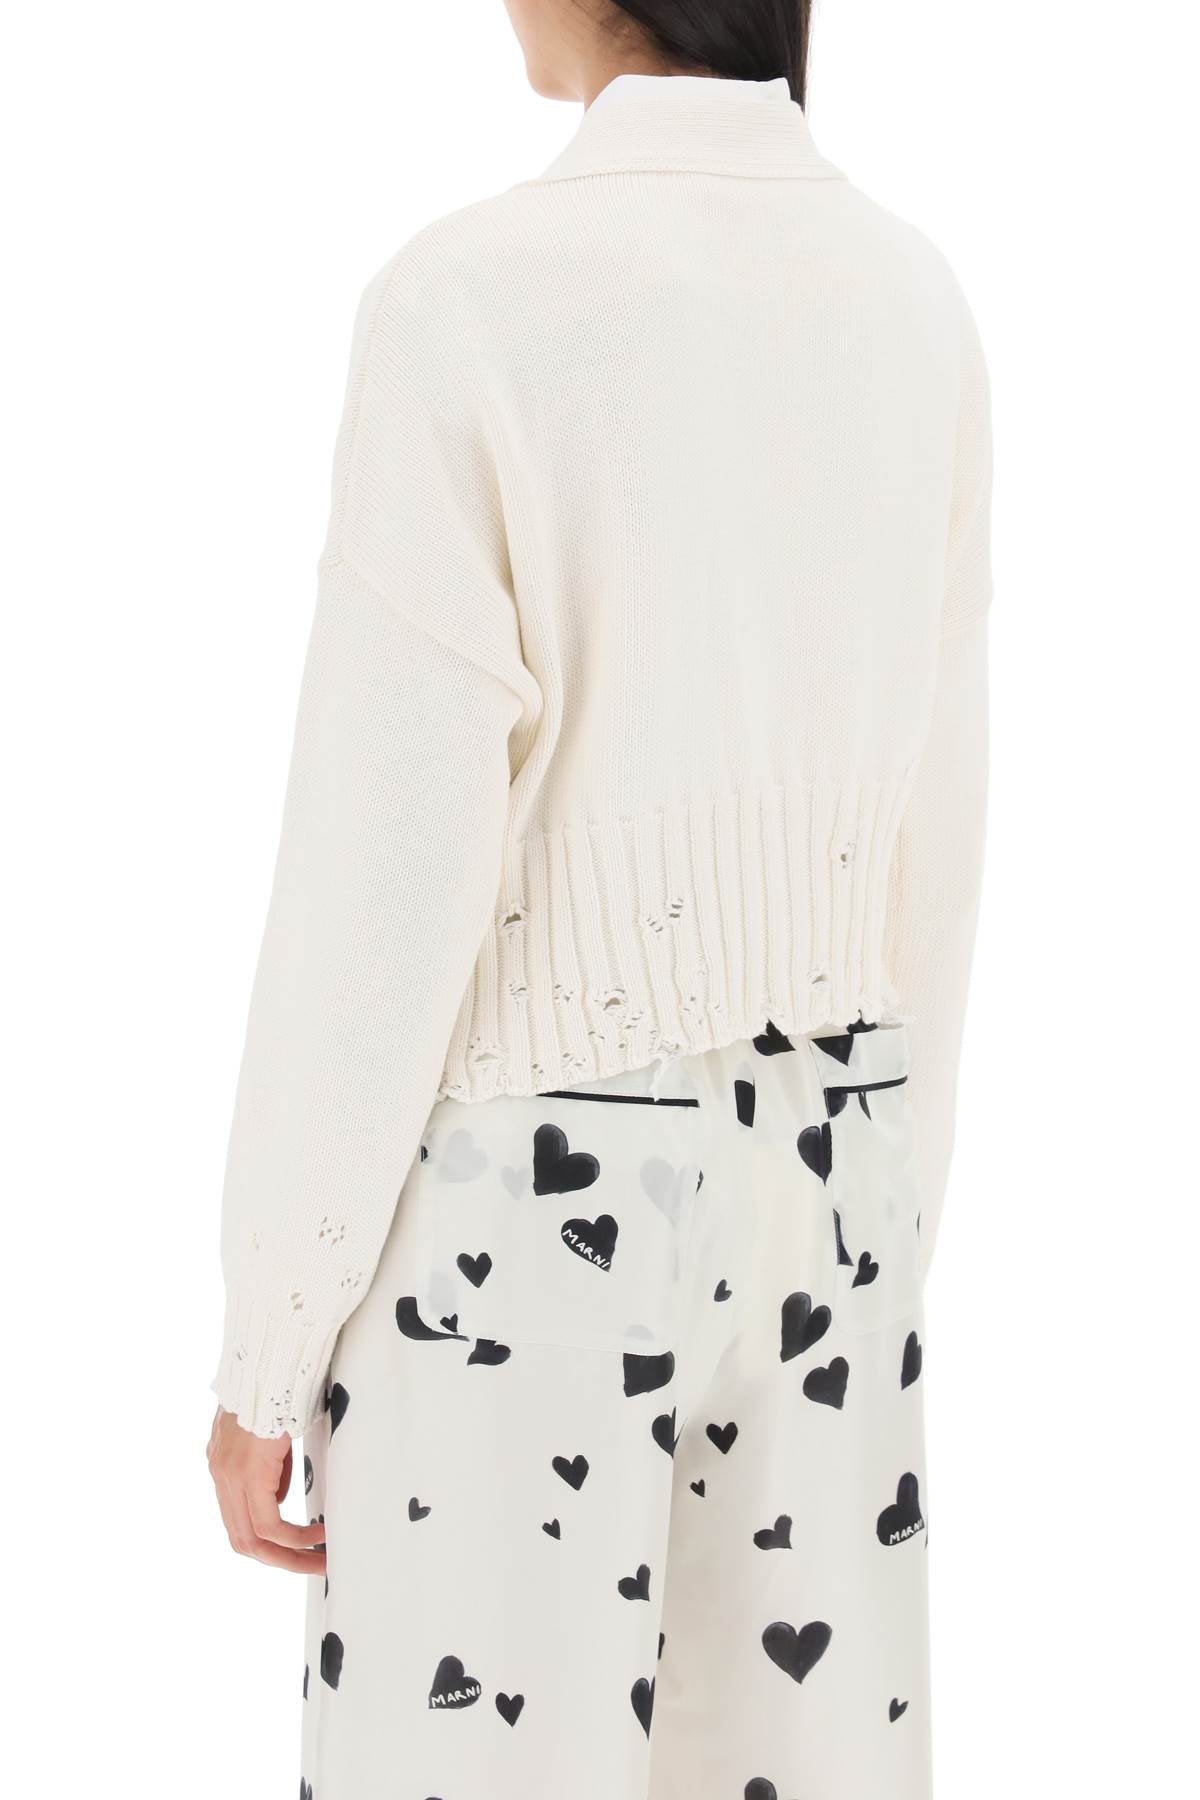 MARNI White Short Cardigan with Embroidered Lettering